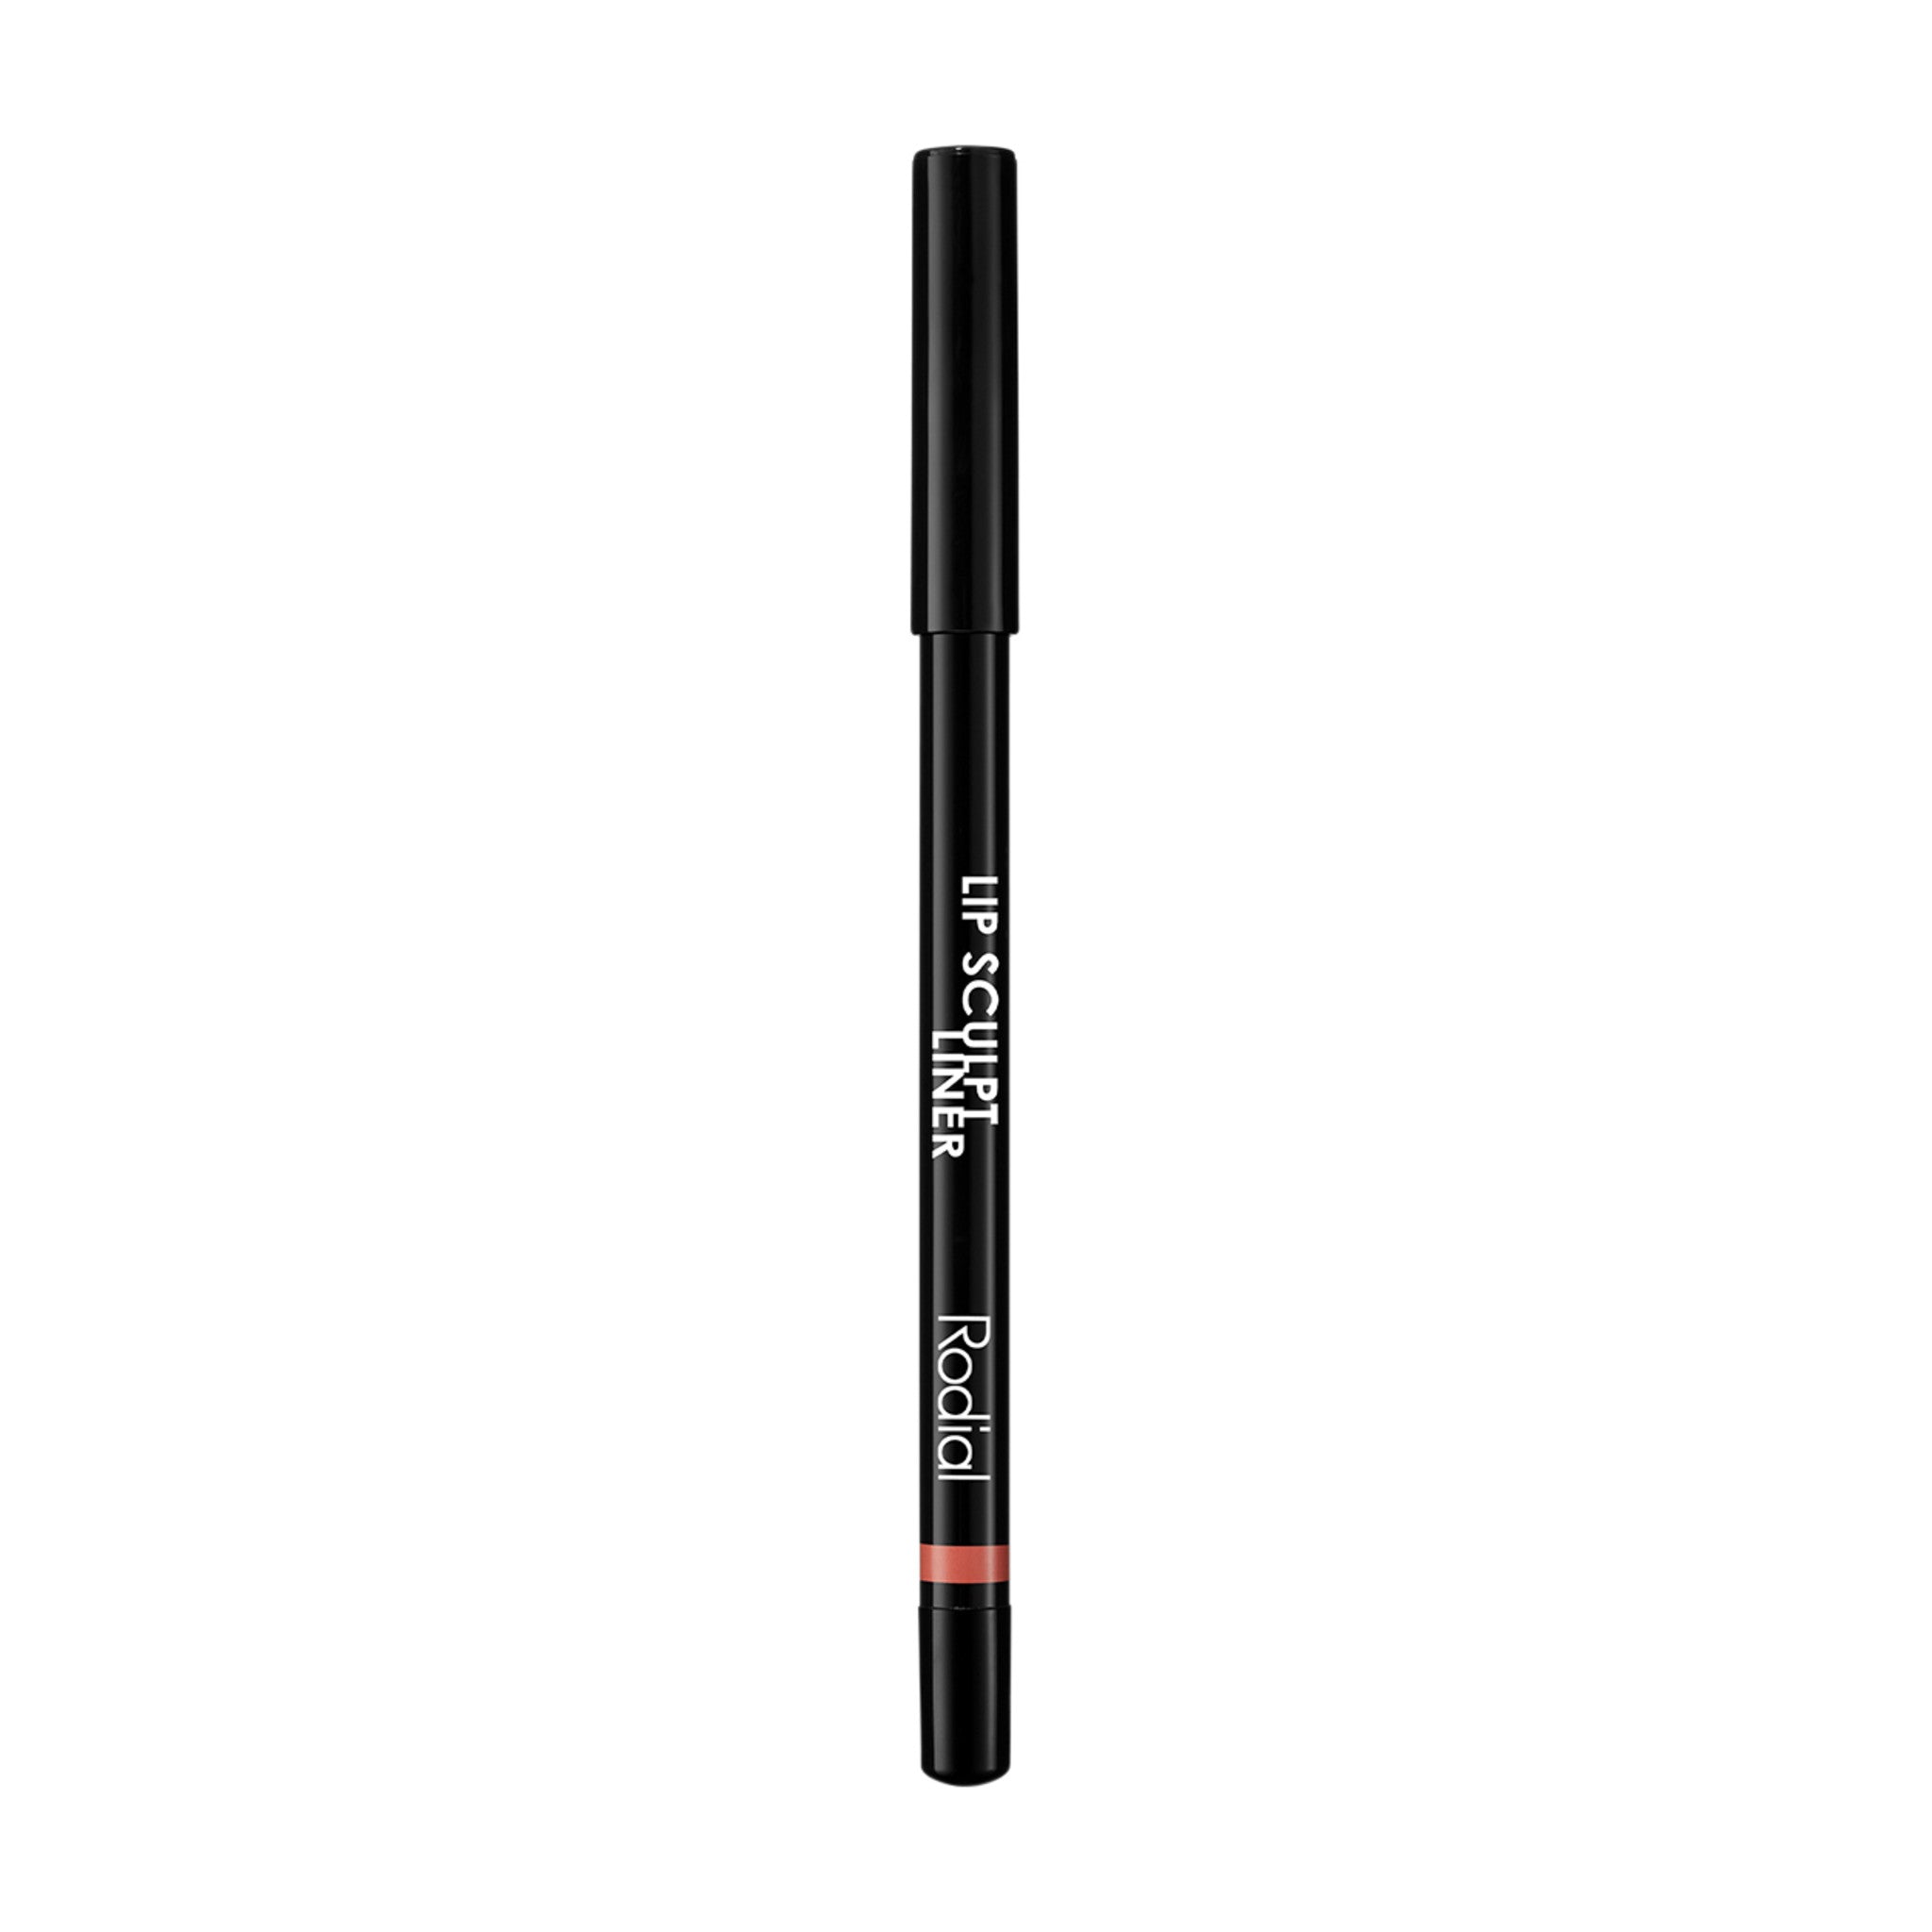 Rodial Lip Sculpt Liner Color/Shade variant: Pink Velvet main image. This product is in the color pink